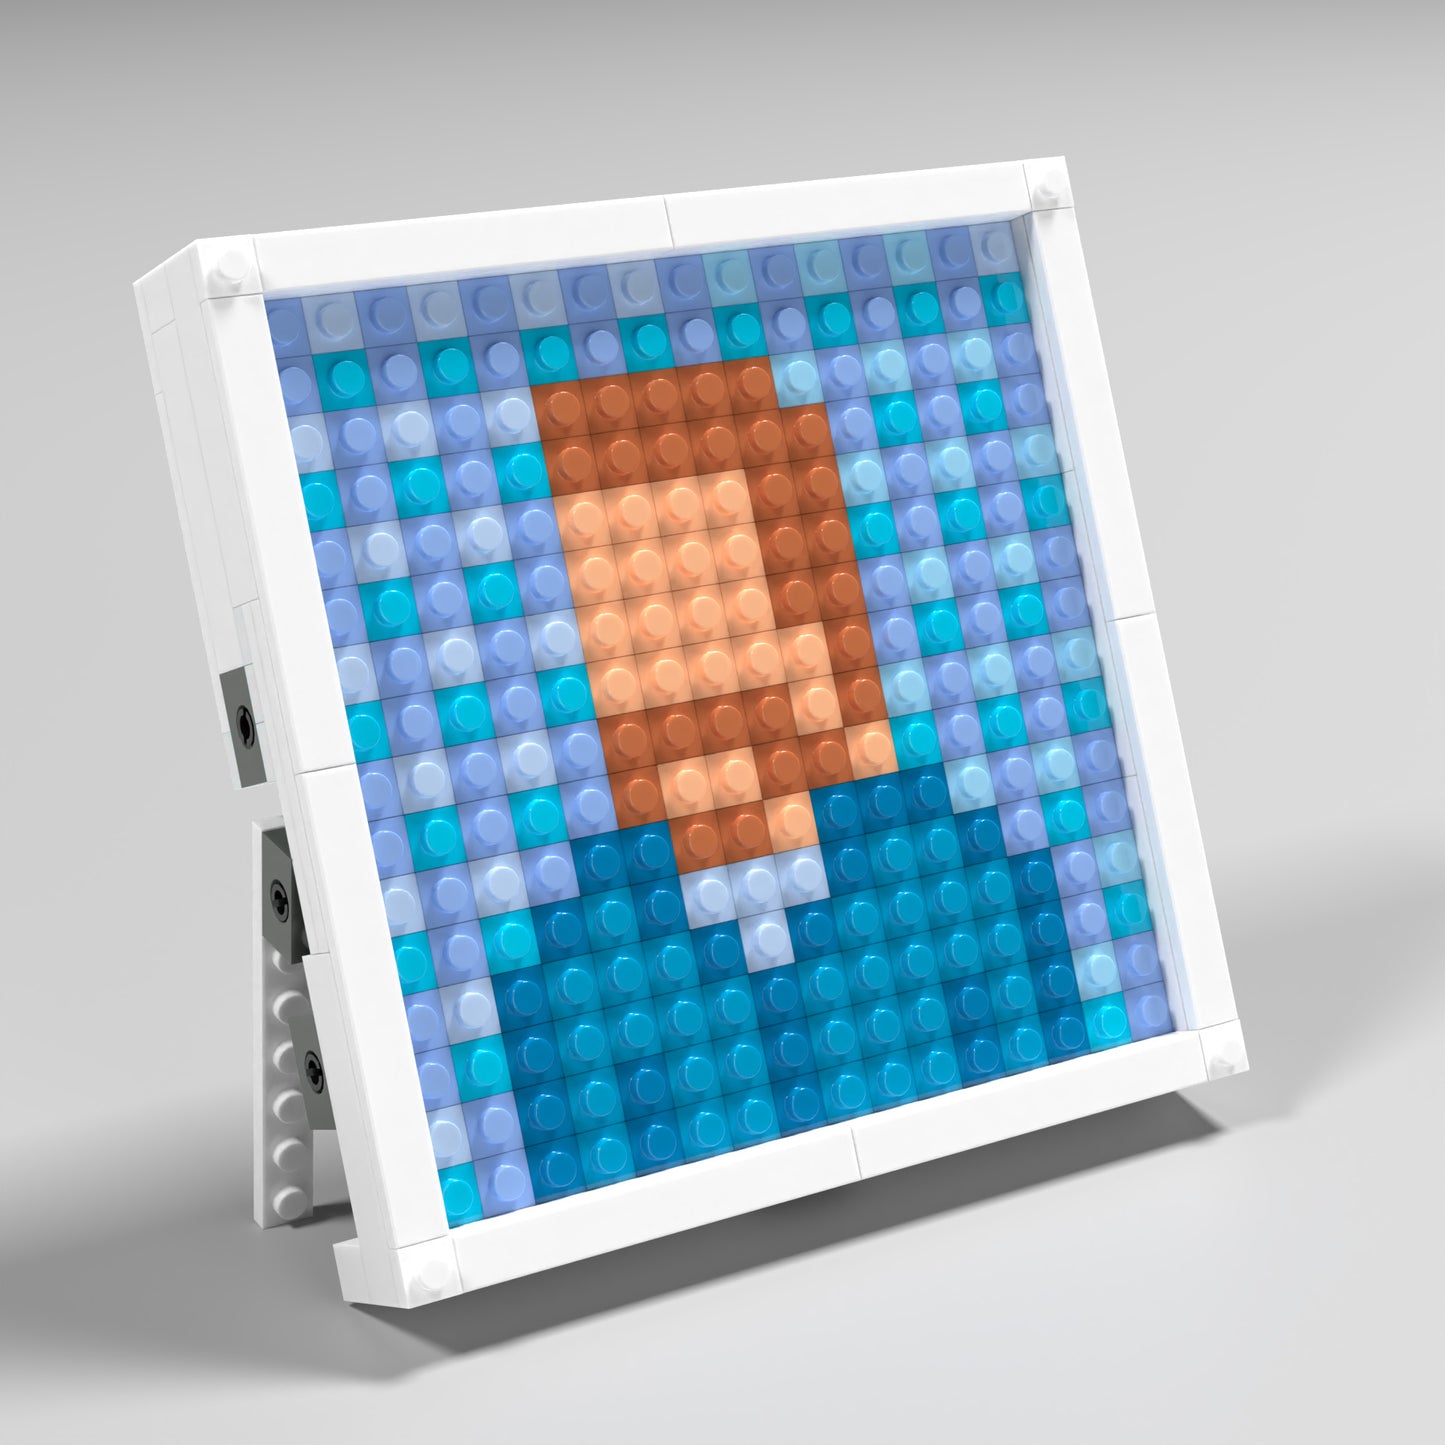 Pixel Art of Van Gogh's Self-Portrait Compatible Lego Set - An Abstract Decoration to Ignite Passion for Arts